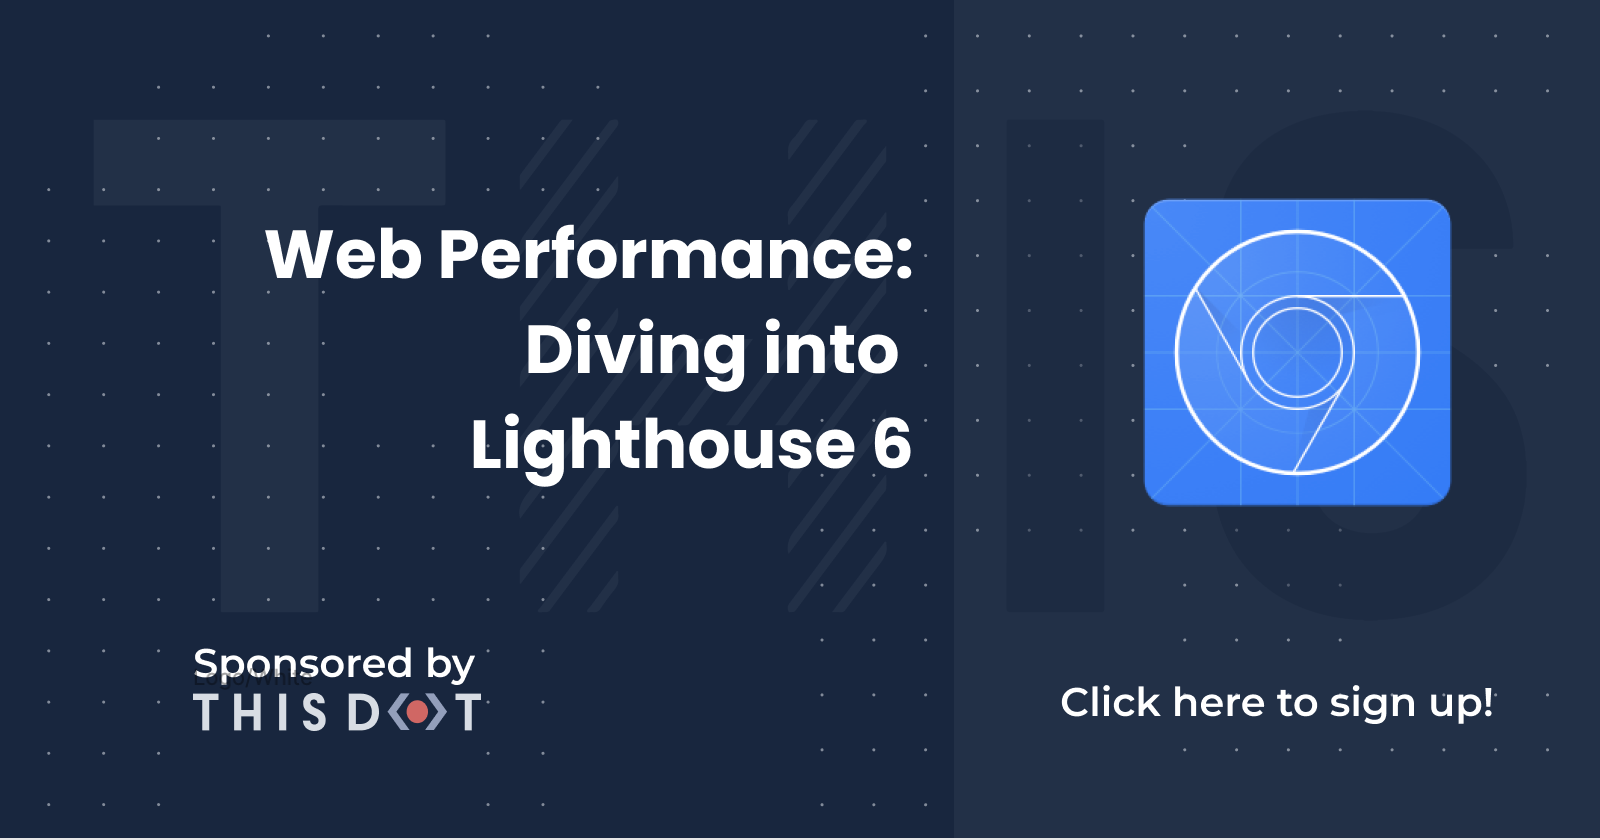 Web Performance: Diving into Lighthouse 6 (link)